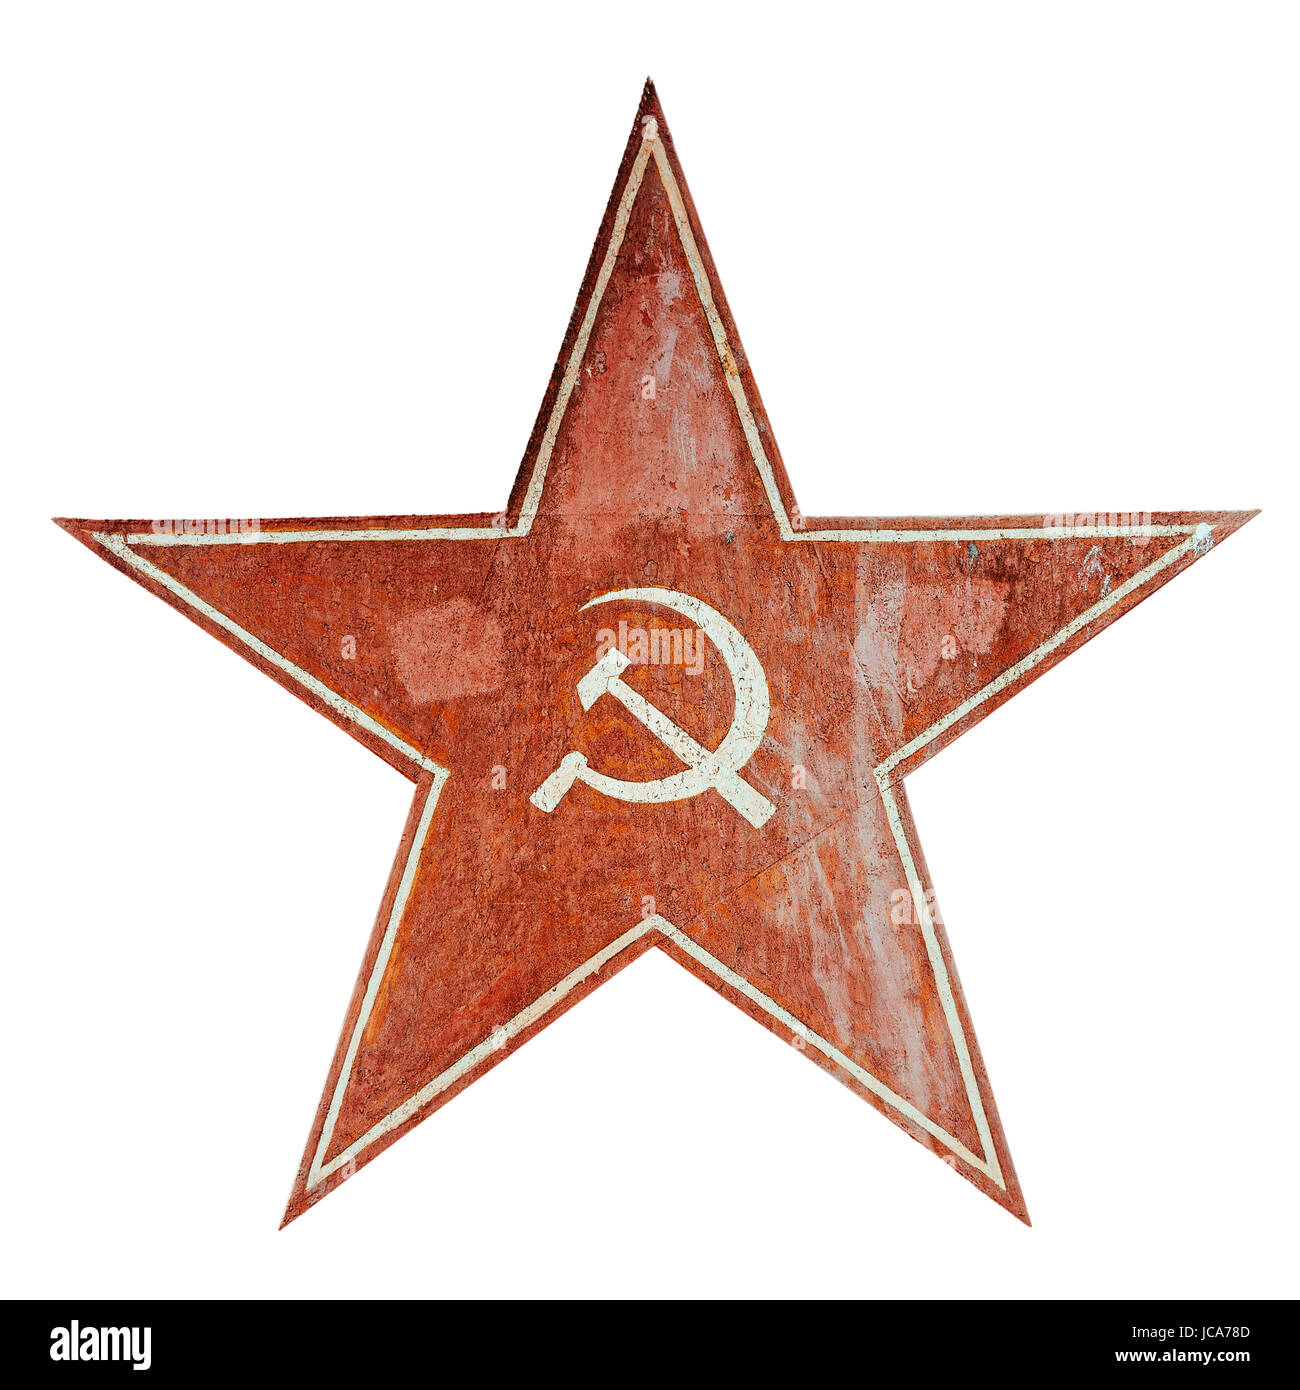 Red USSR communism symbol with hammer and sickle. Aged metal plate isolated on white. Stock Photo